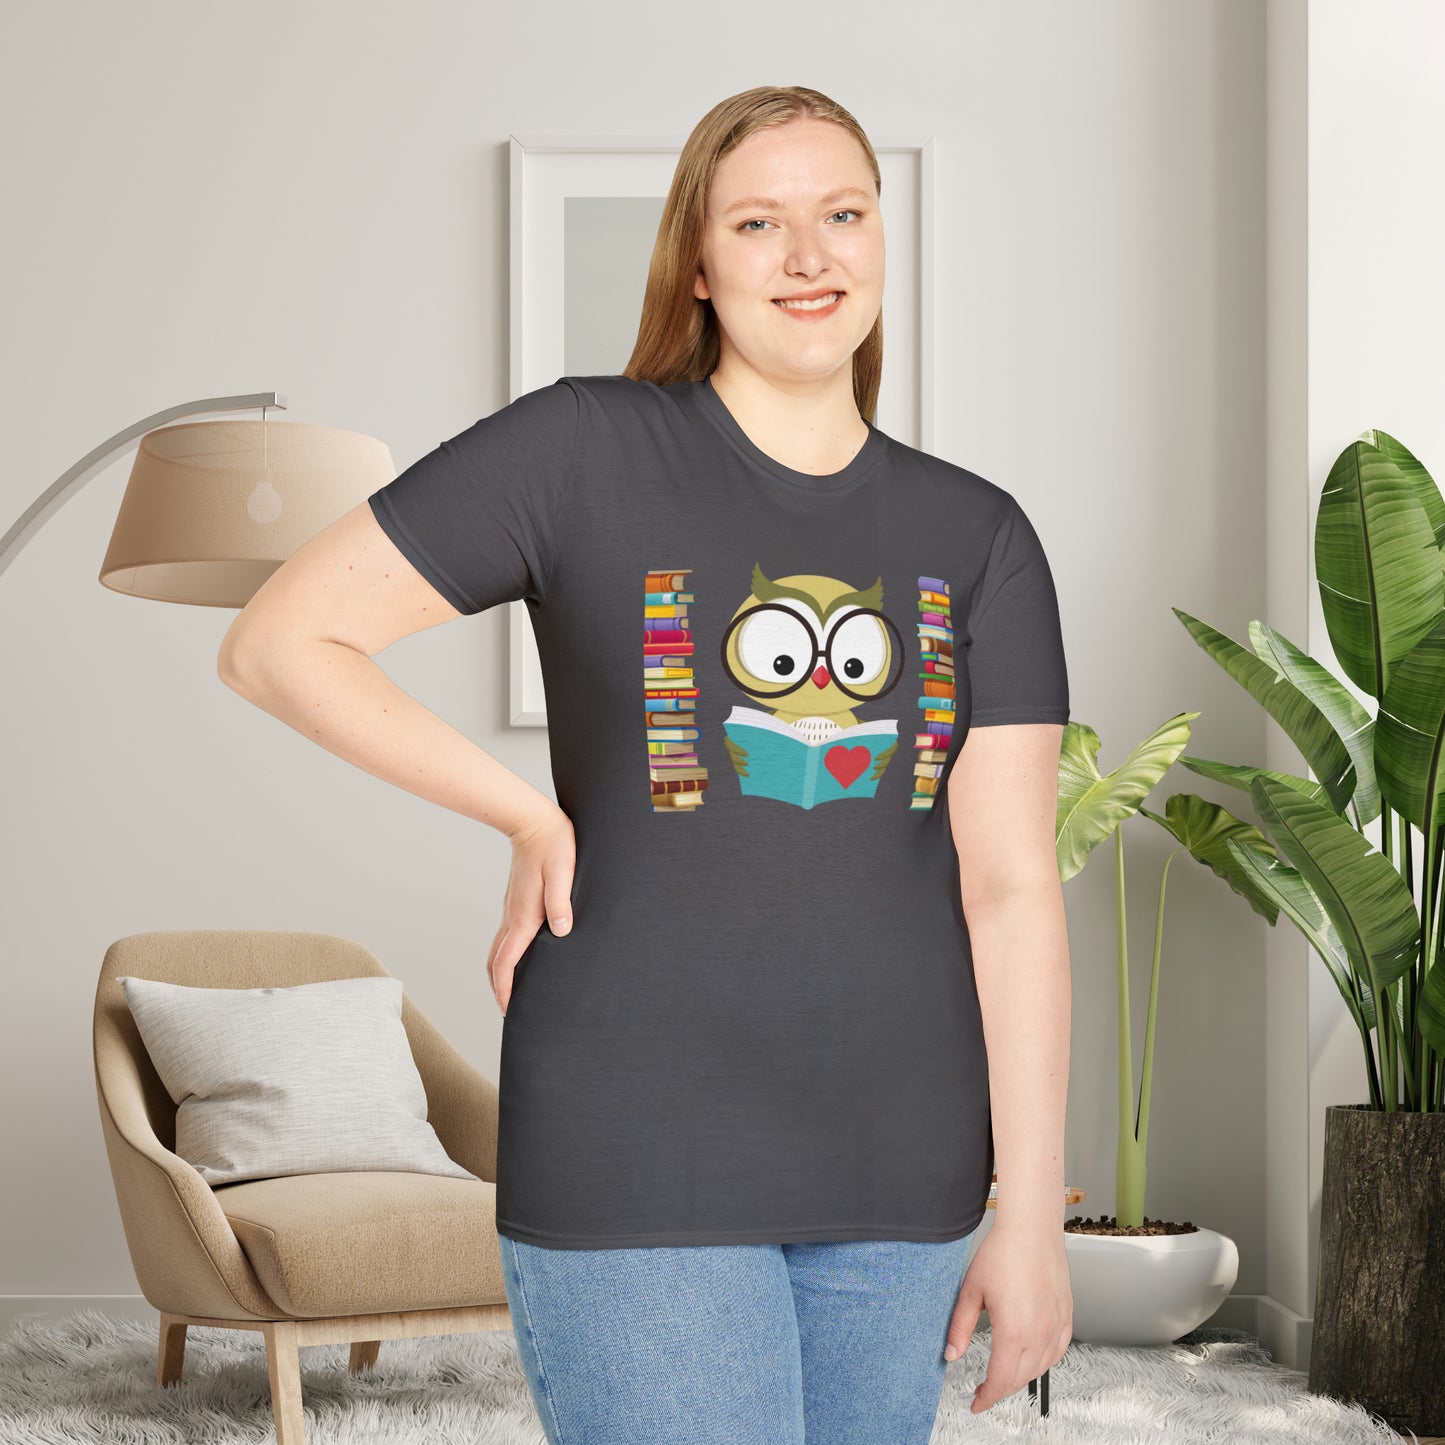 This celebrates all book lovers out there! Get this Unisex Softstyle T-Shirt as a gift or one for yourself.